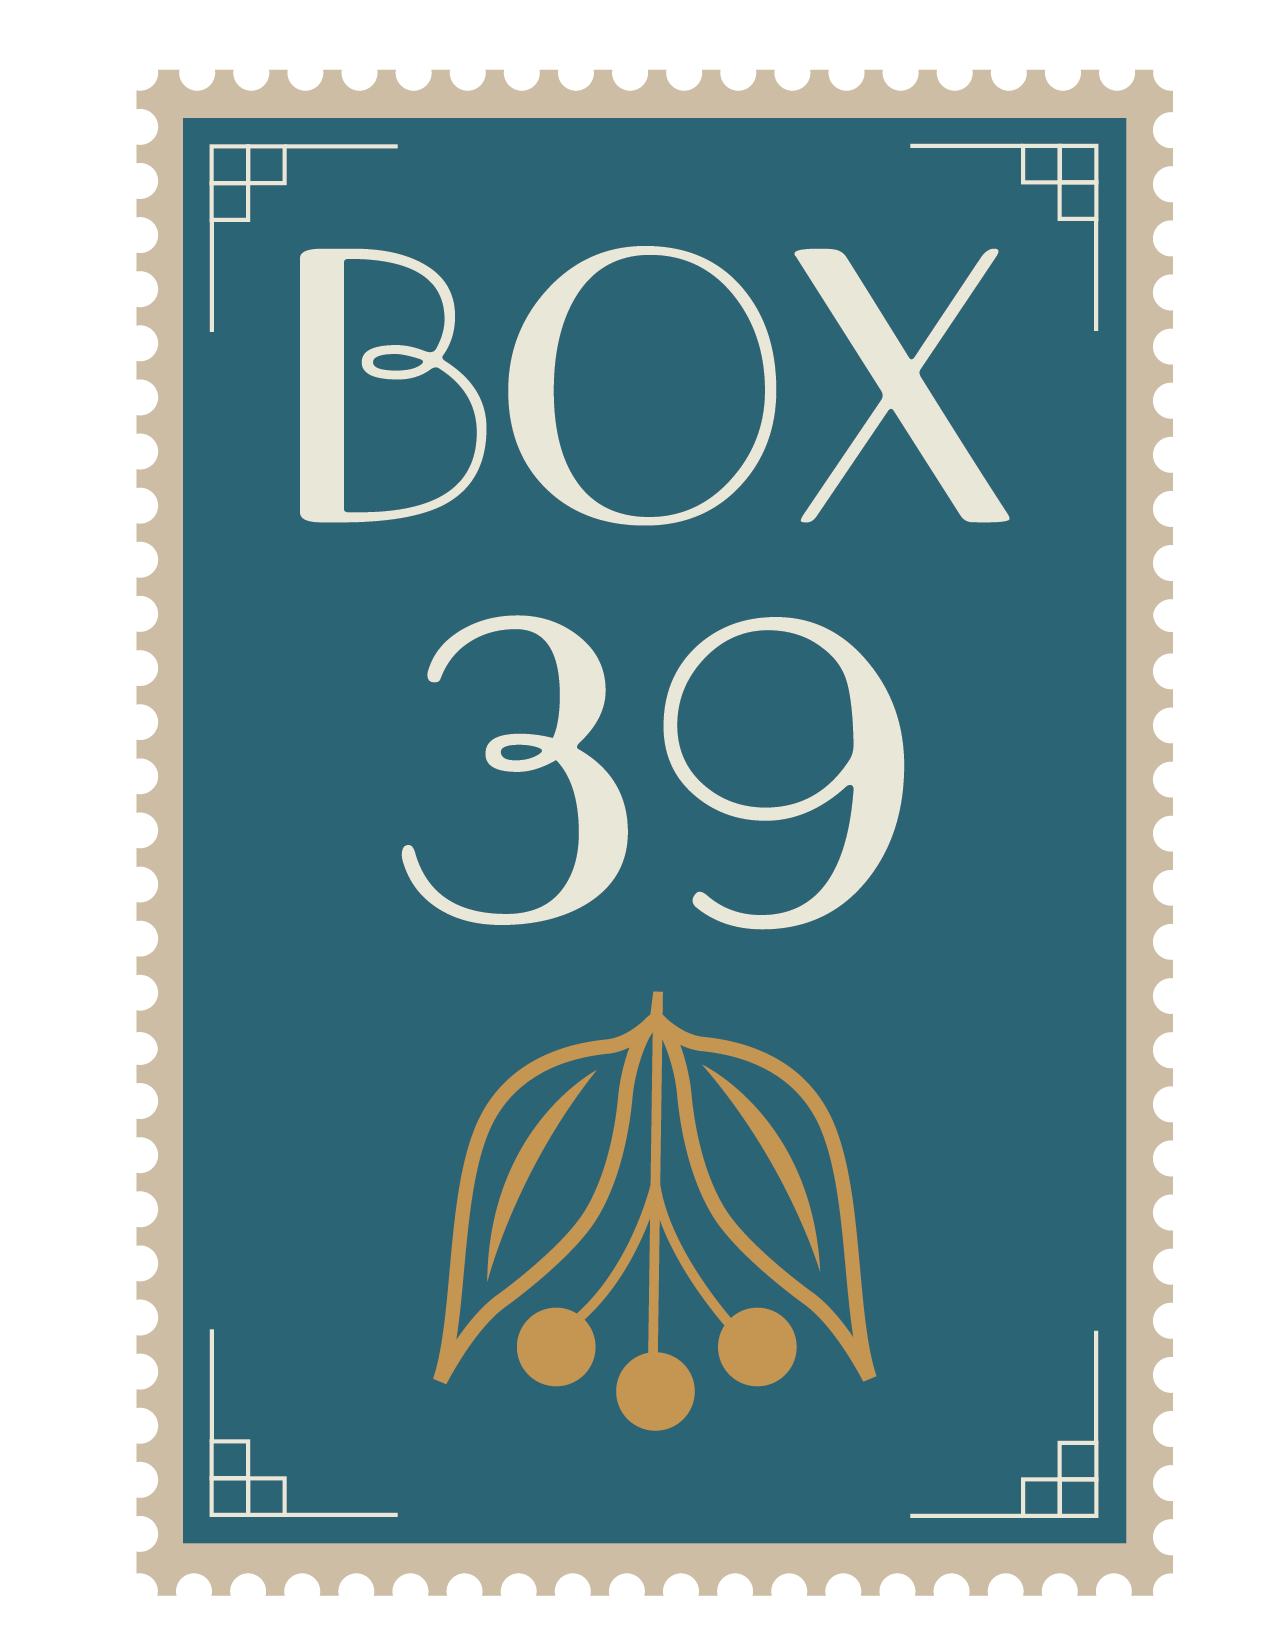 Postcards From Box 39